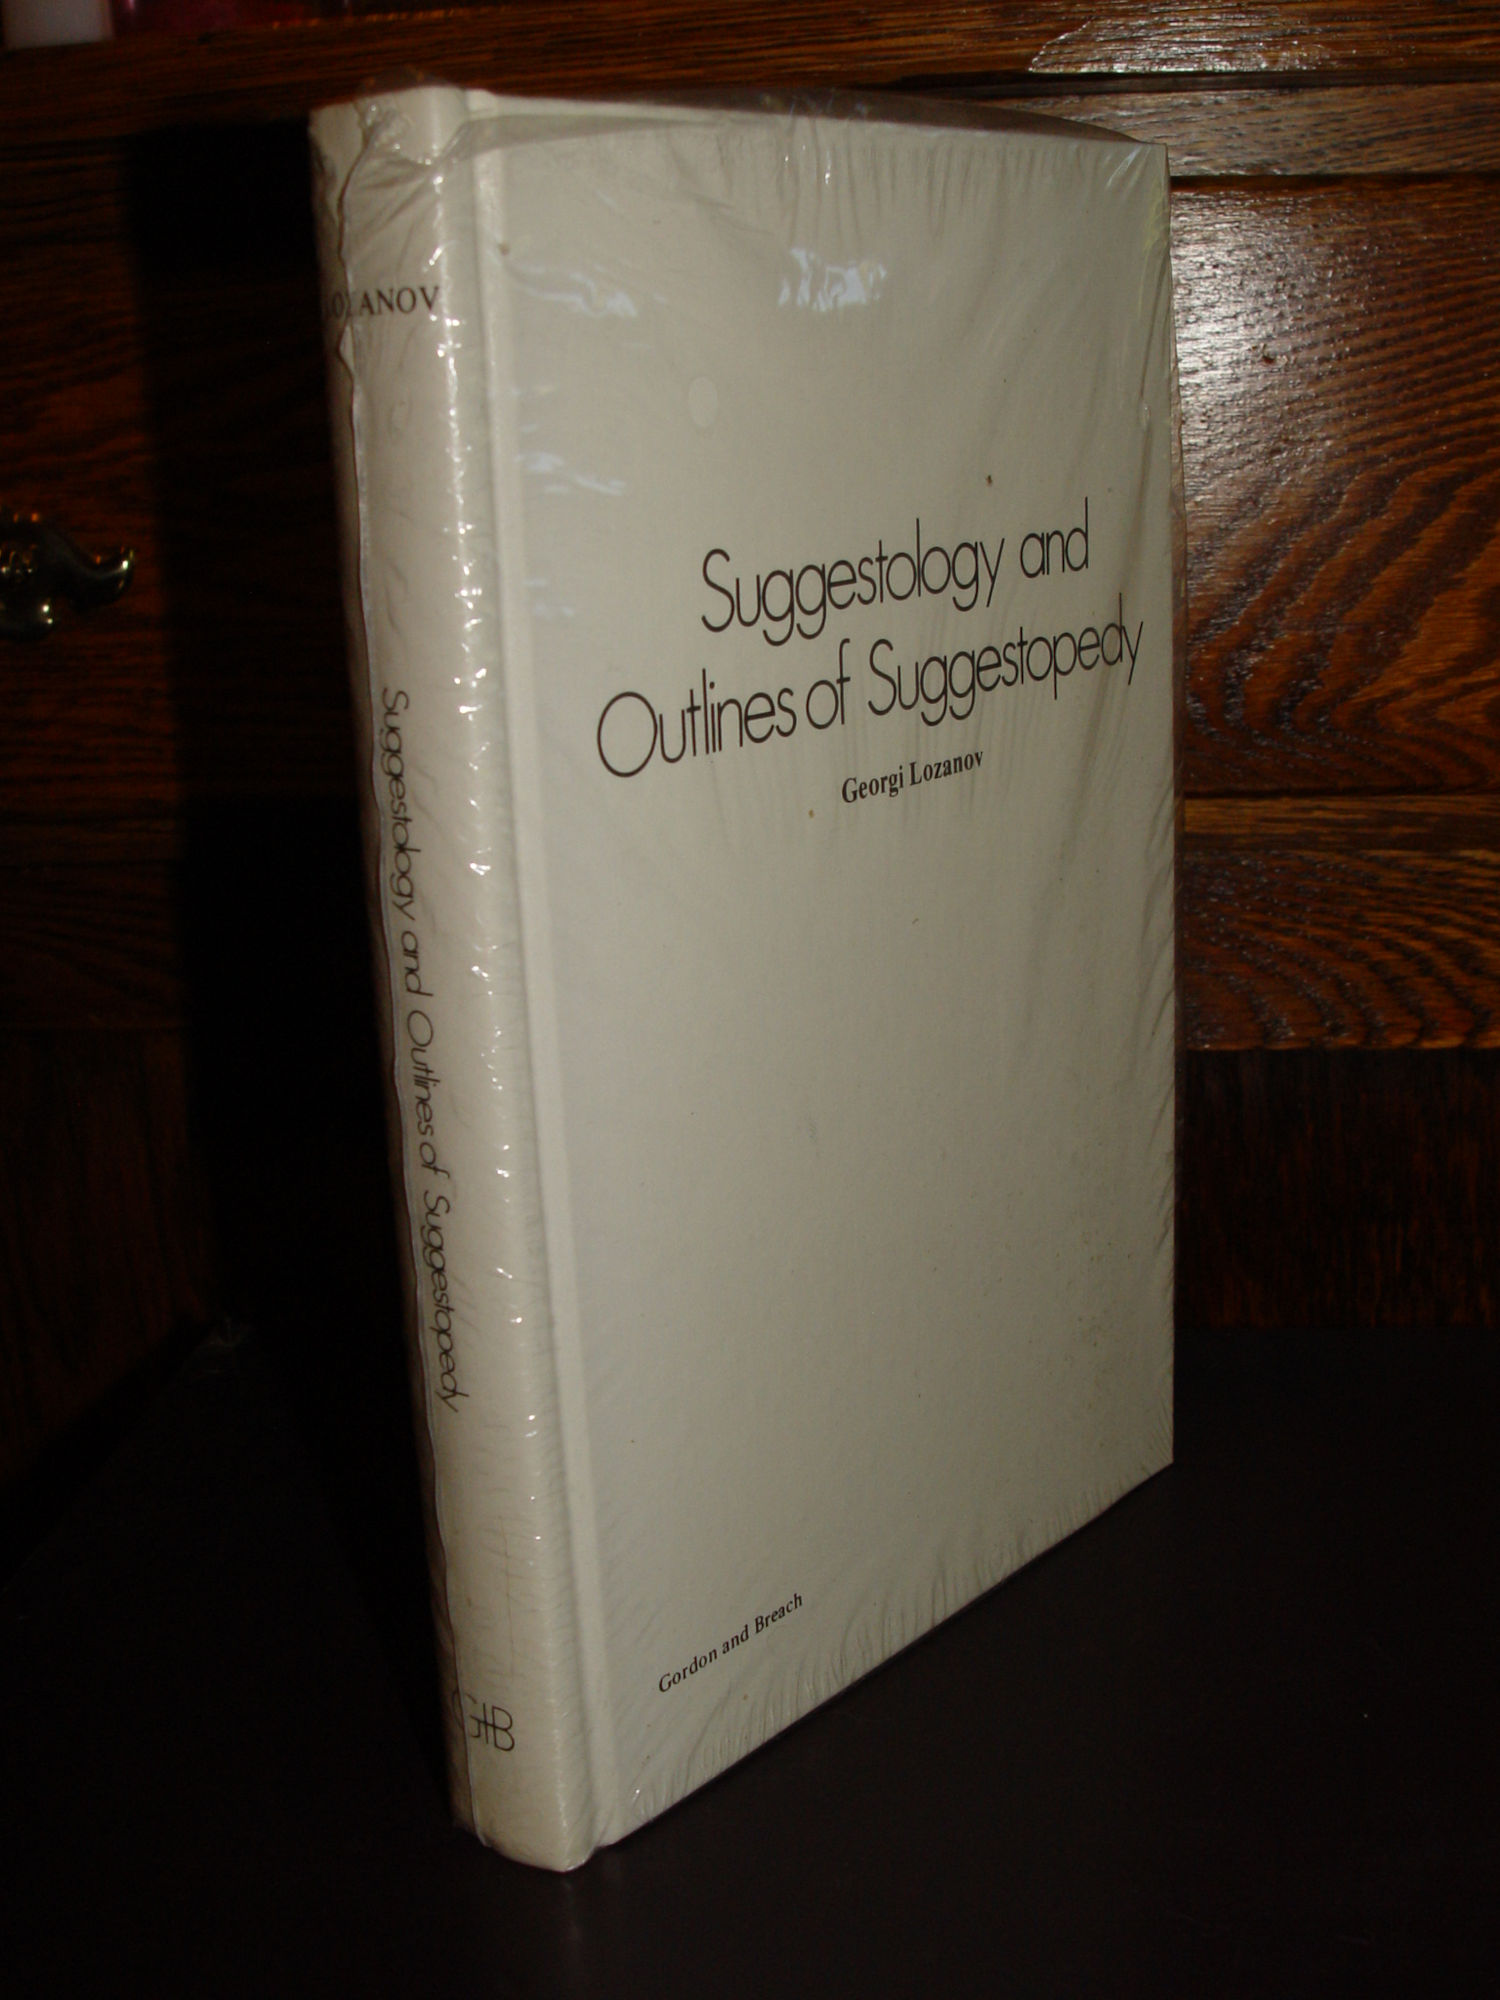 Suggestology and Outlines of Suggestopedy 1978
                (Psychic studies) by Georgi Lozanov